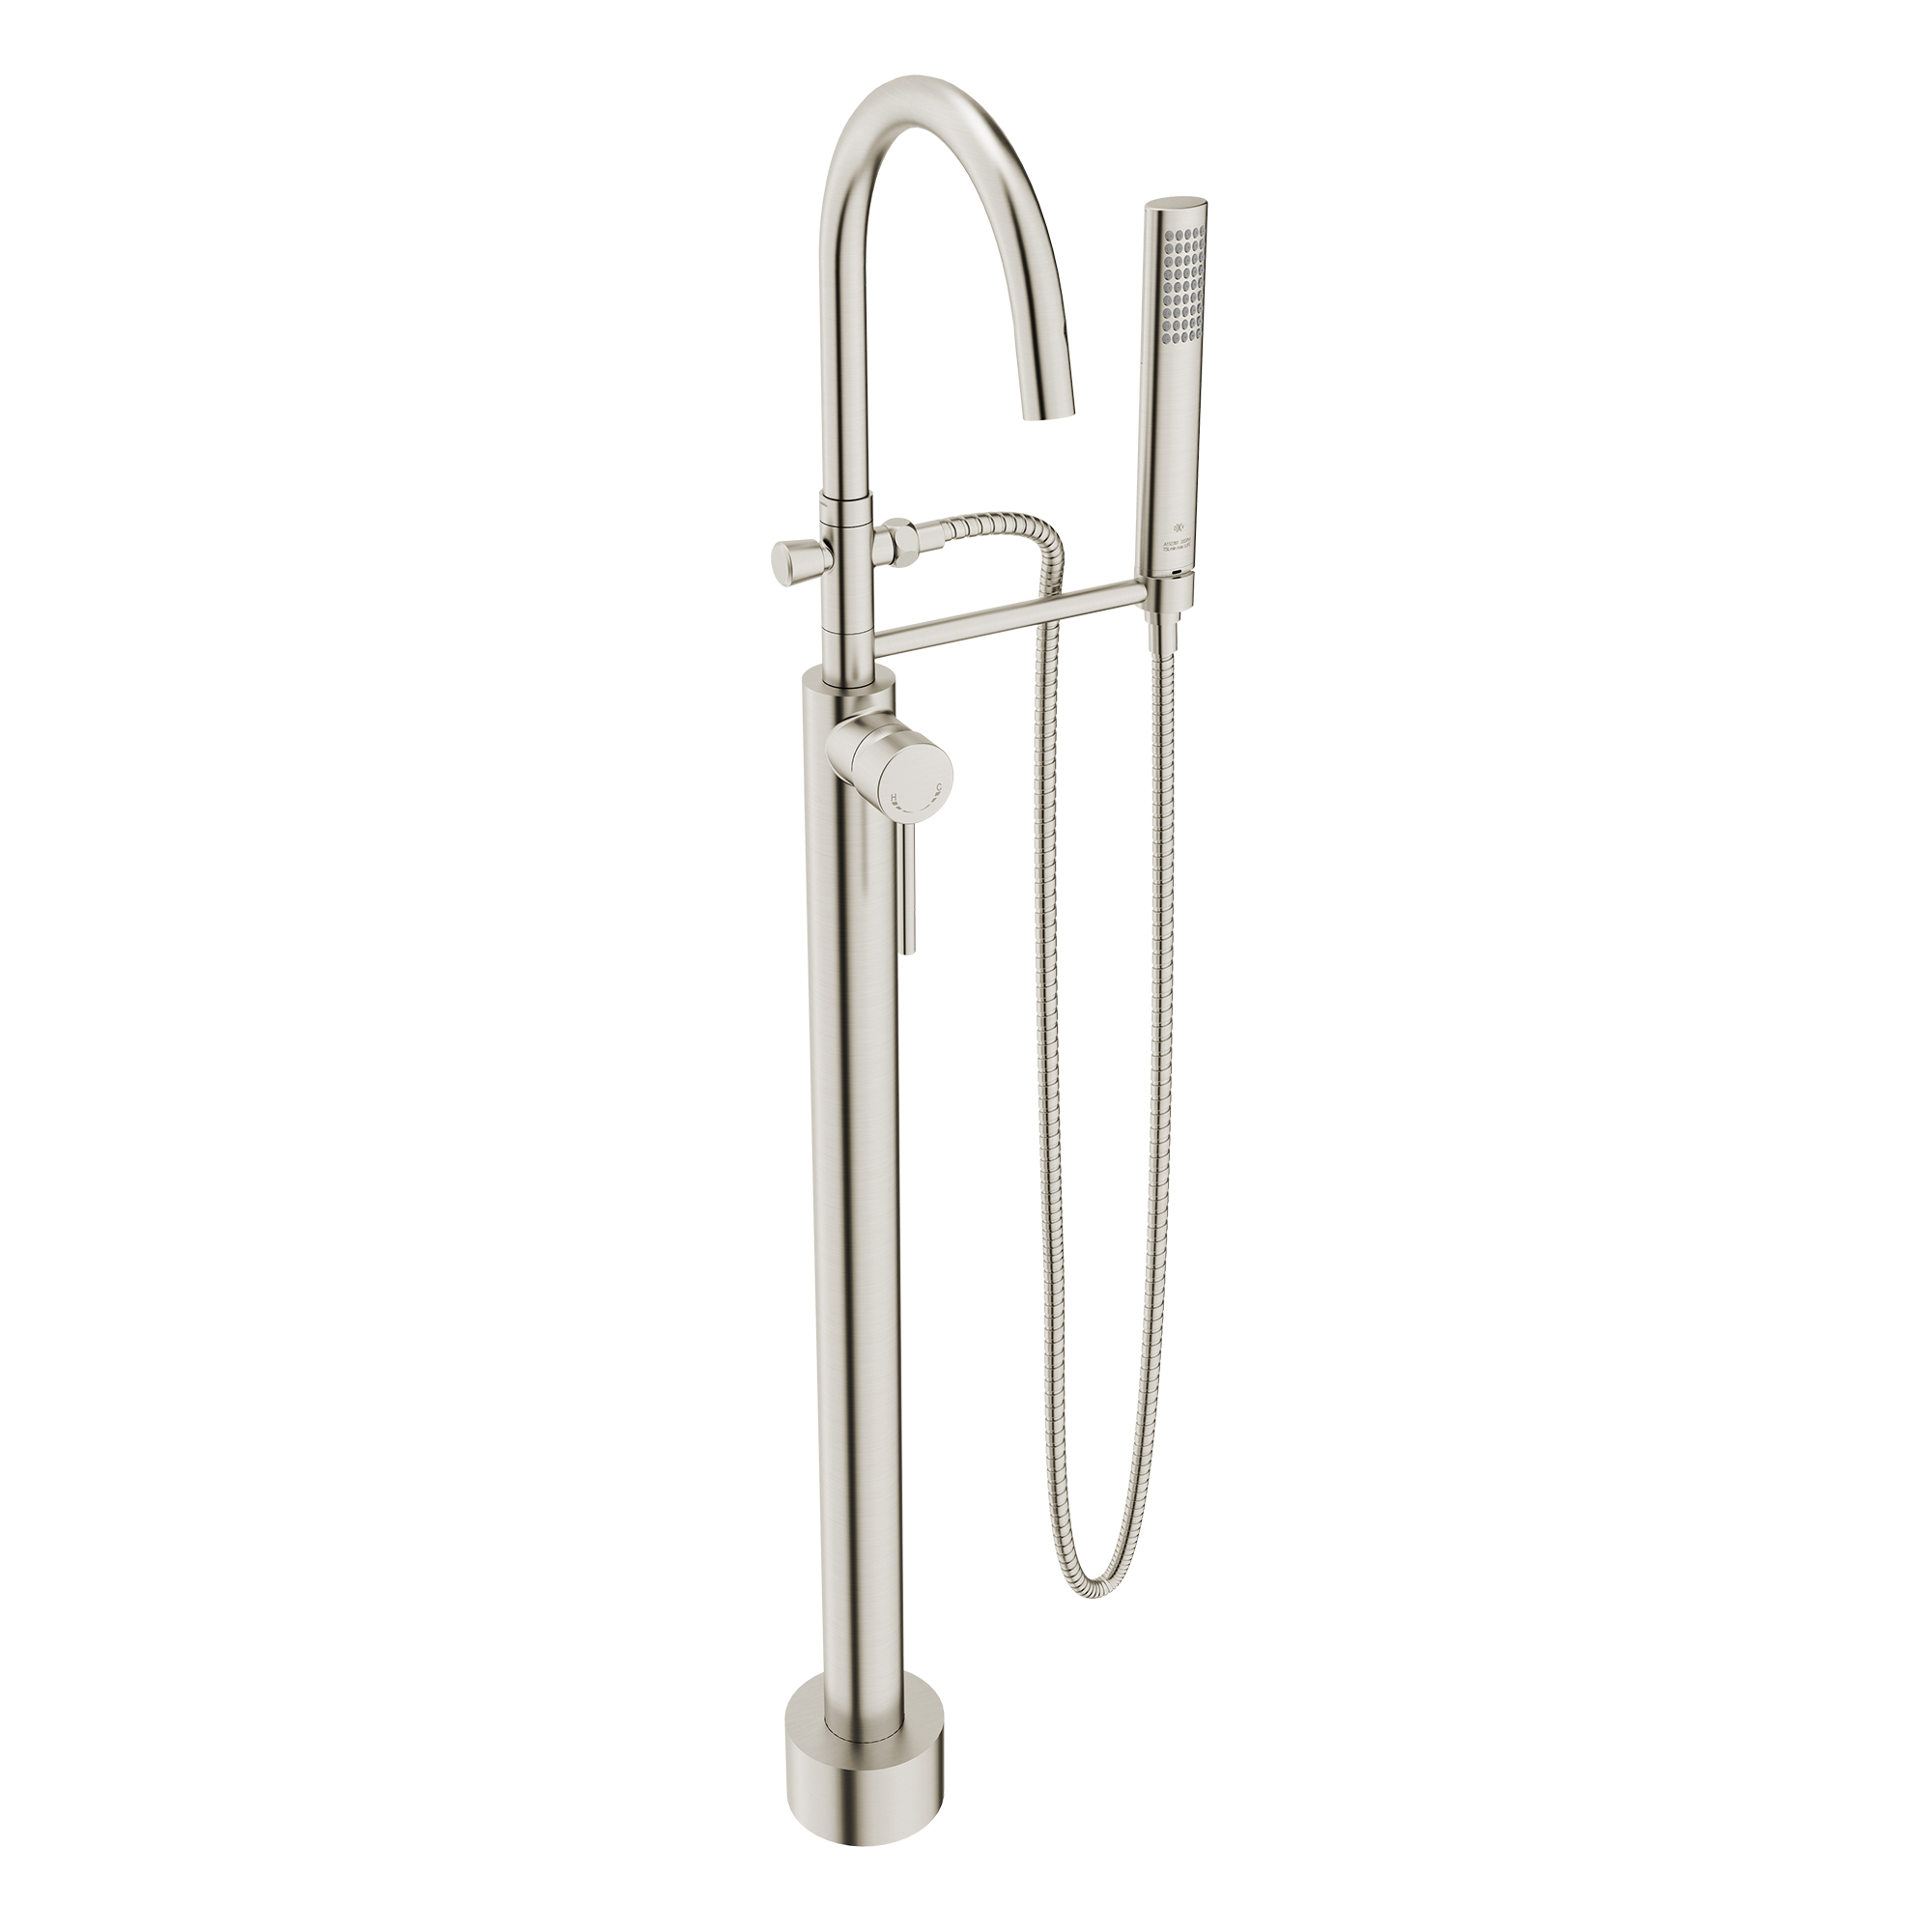 Equility Round Floor Mount Bathtub Filler with Hand Shower and Lever Handle